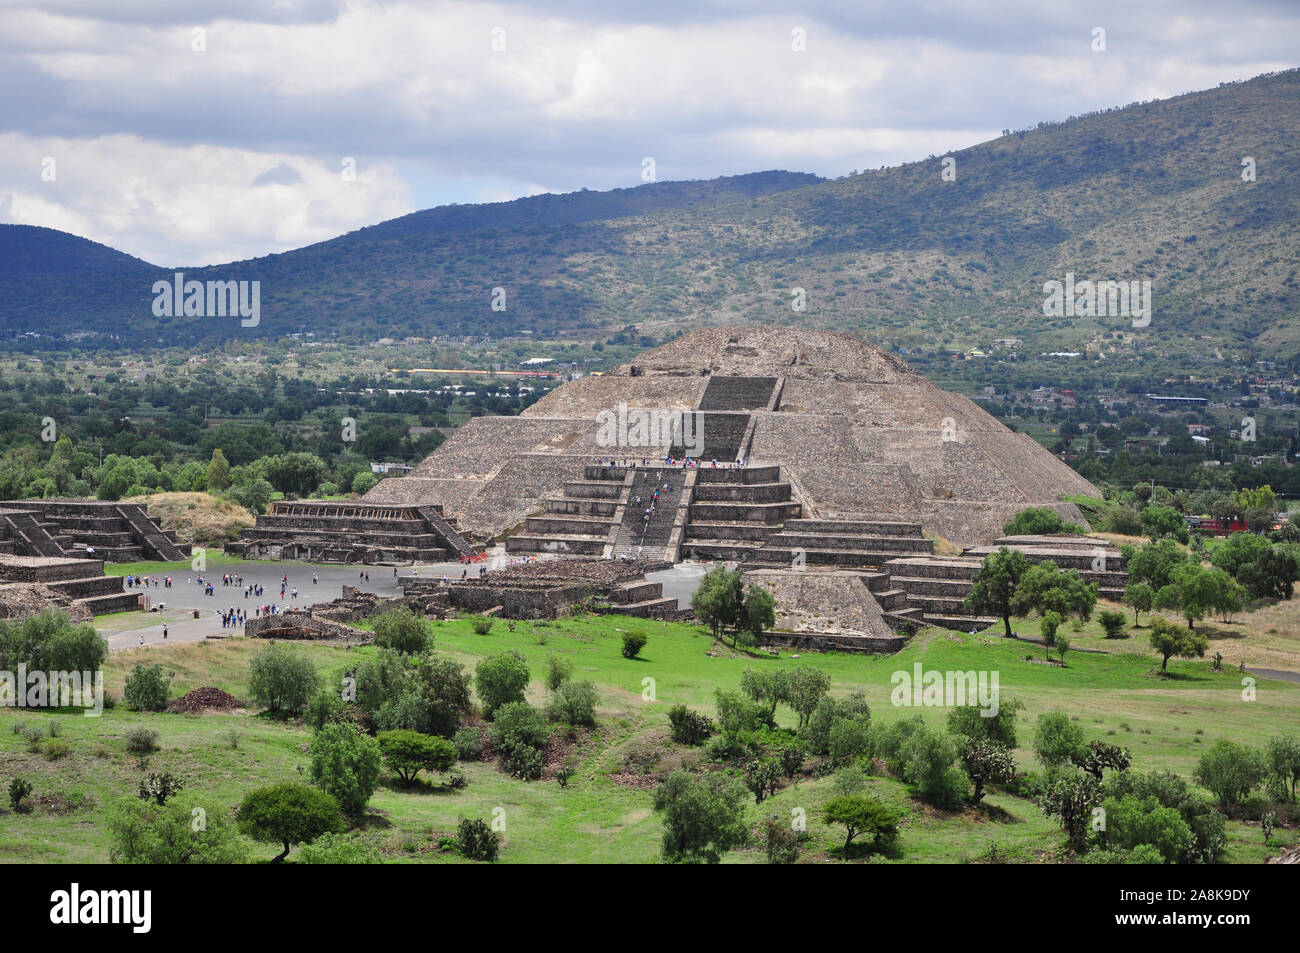 View of the pyramid of the moon at aztec pyramid Teotihuacan , ancient Mesoamerican city in Mexico, located in the Valley of Mexico, near of Mexico Ci Stock Photo